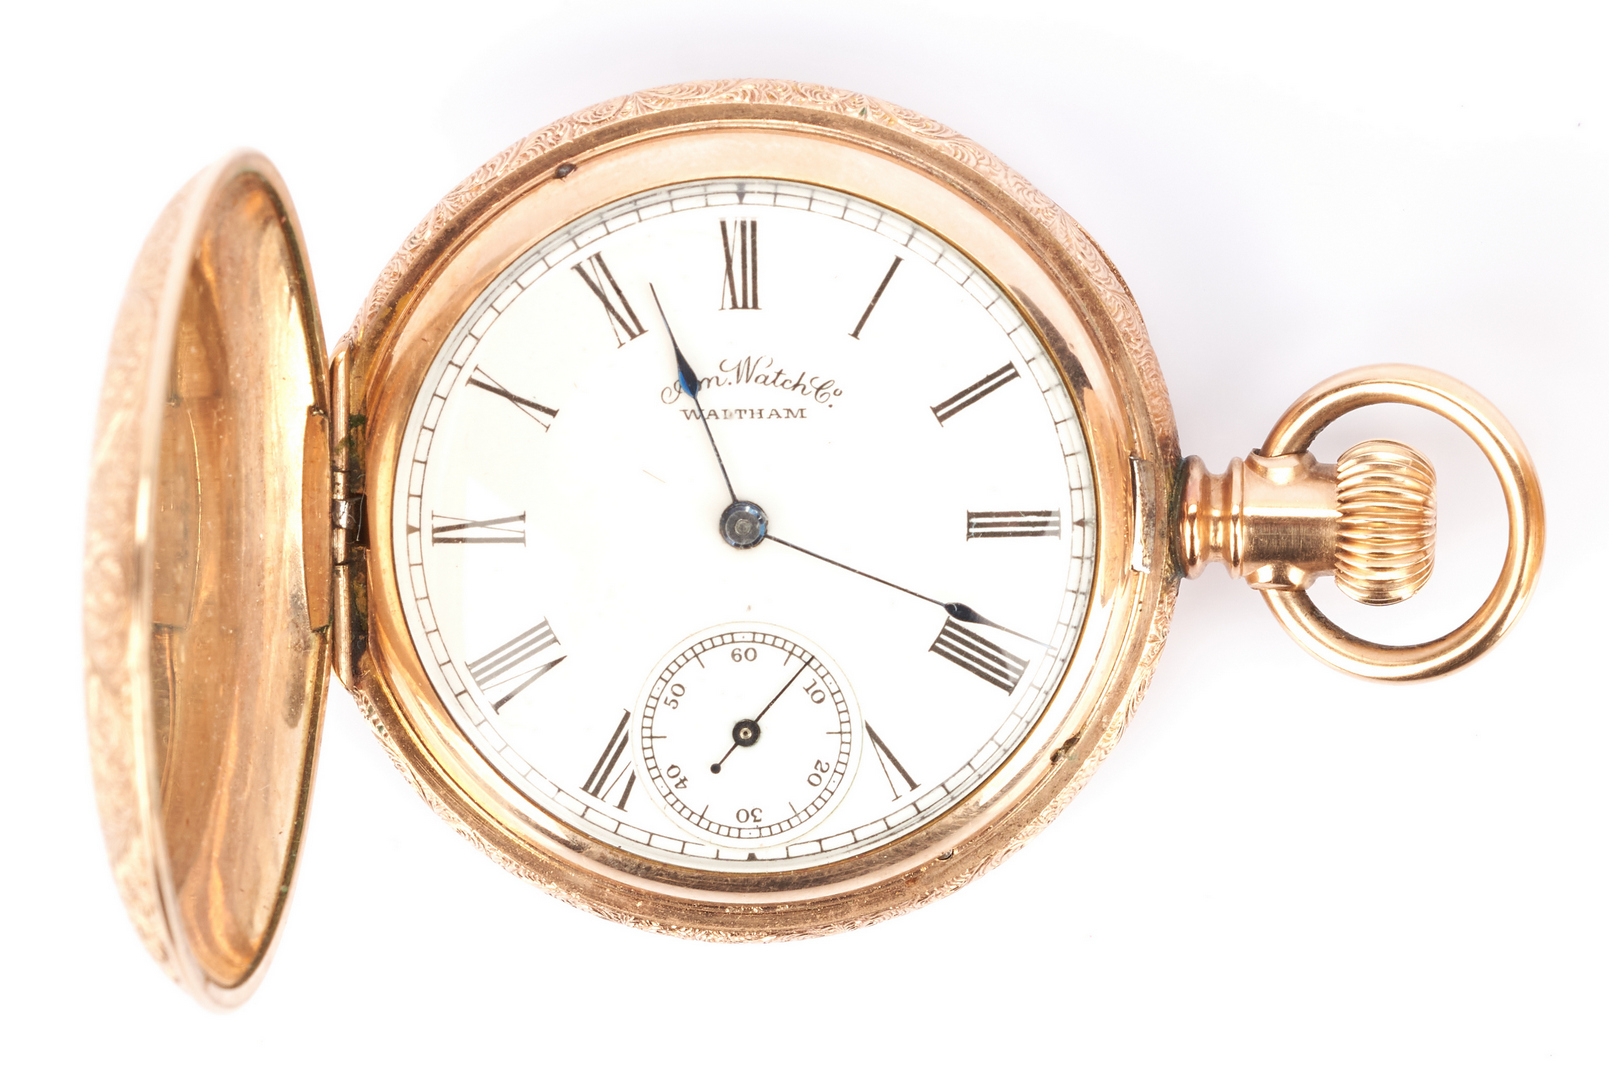 Lot 936: Two (2) Hunting Case Pocket Watches